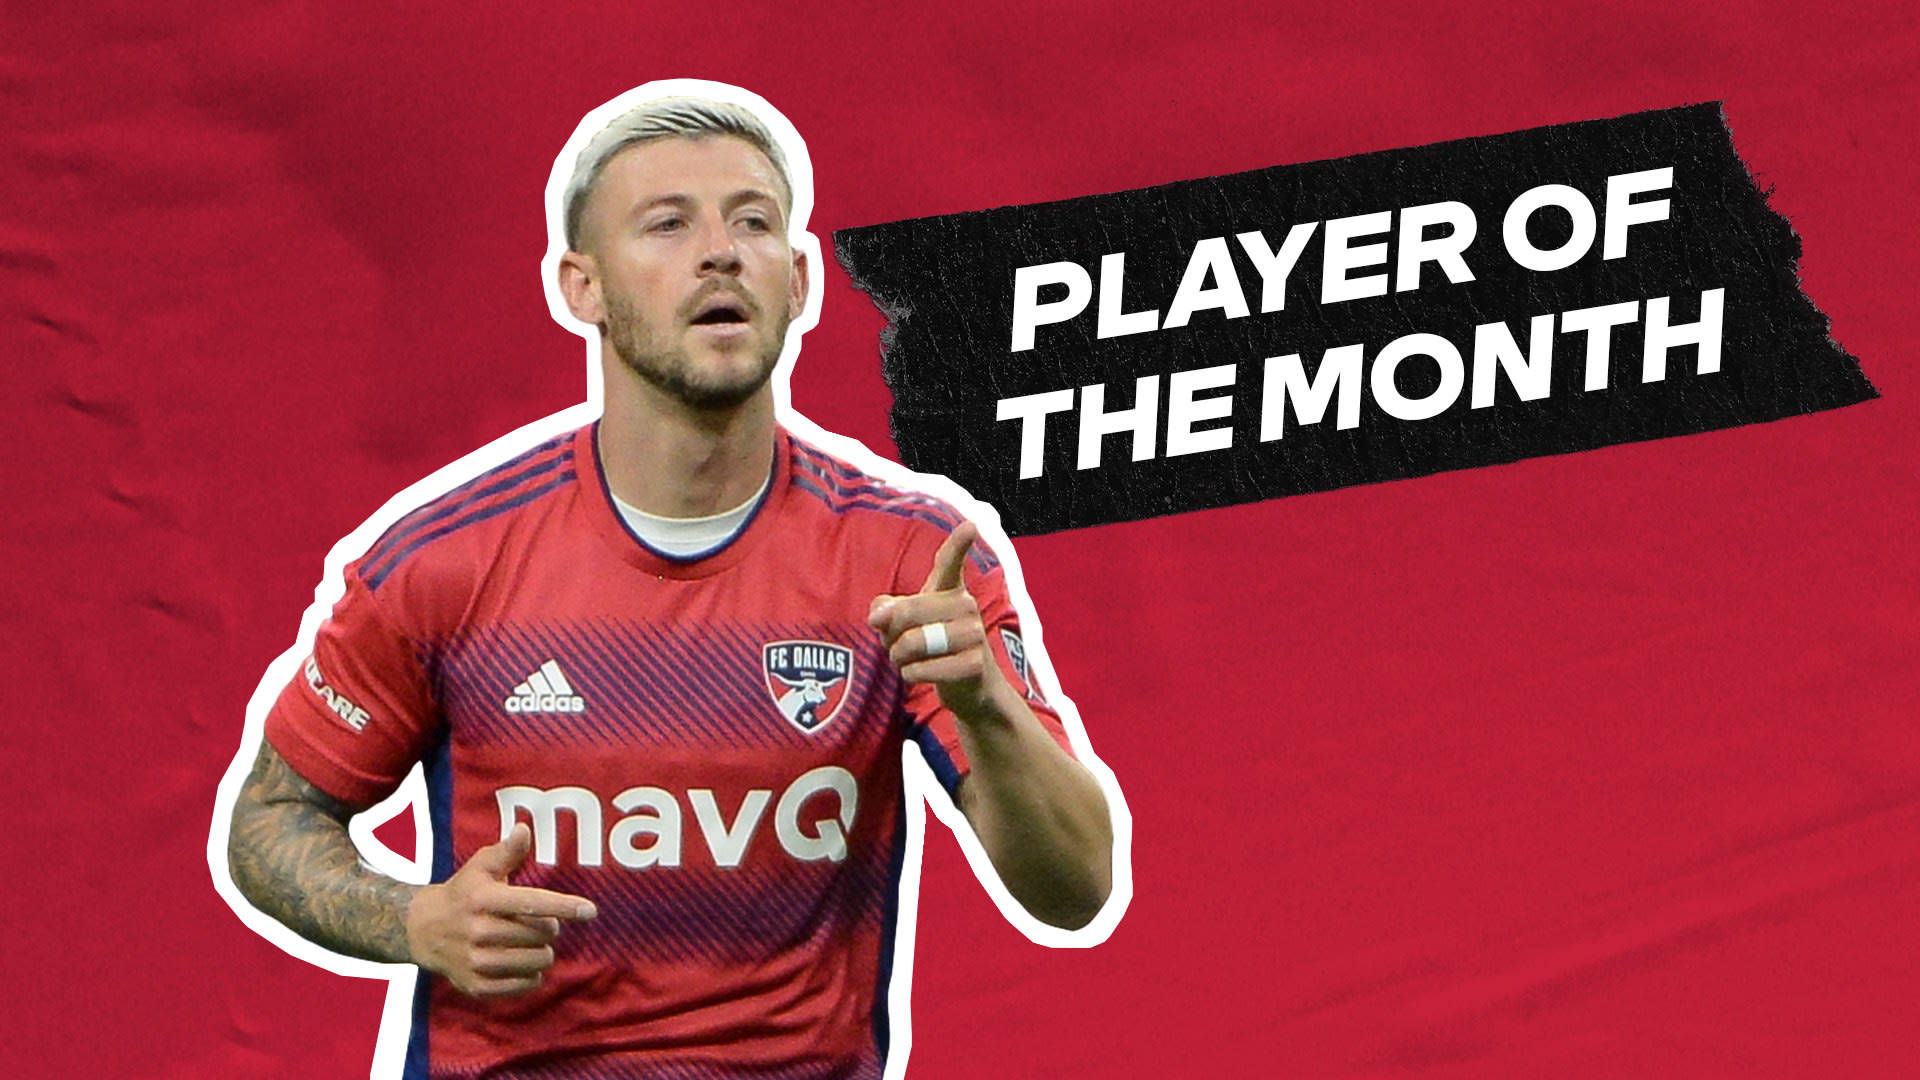 FC Dallas's Paul Arriola Celebrated as Player of the Month Wallpaper